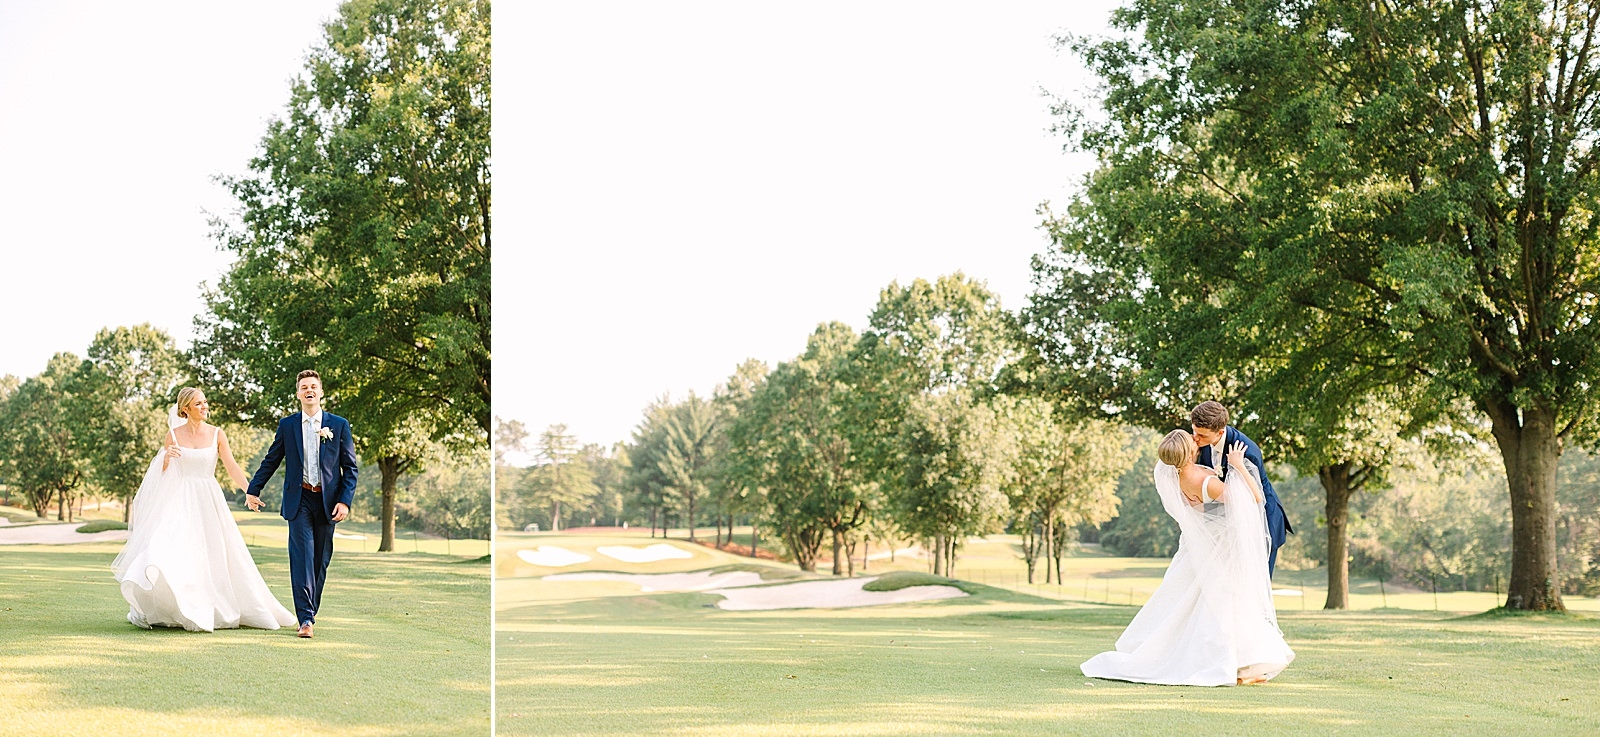 An Evansville Country Club Wedding | Ashley and Beau | Bret and Brandie Photography186.jpg